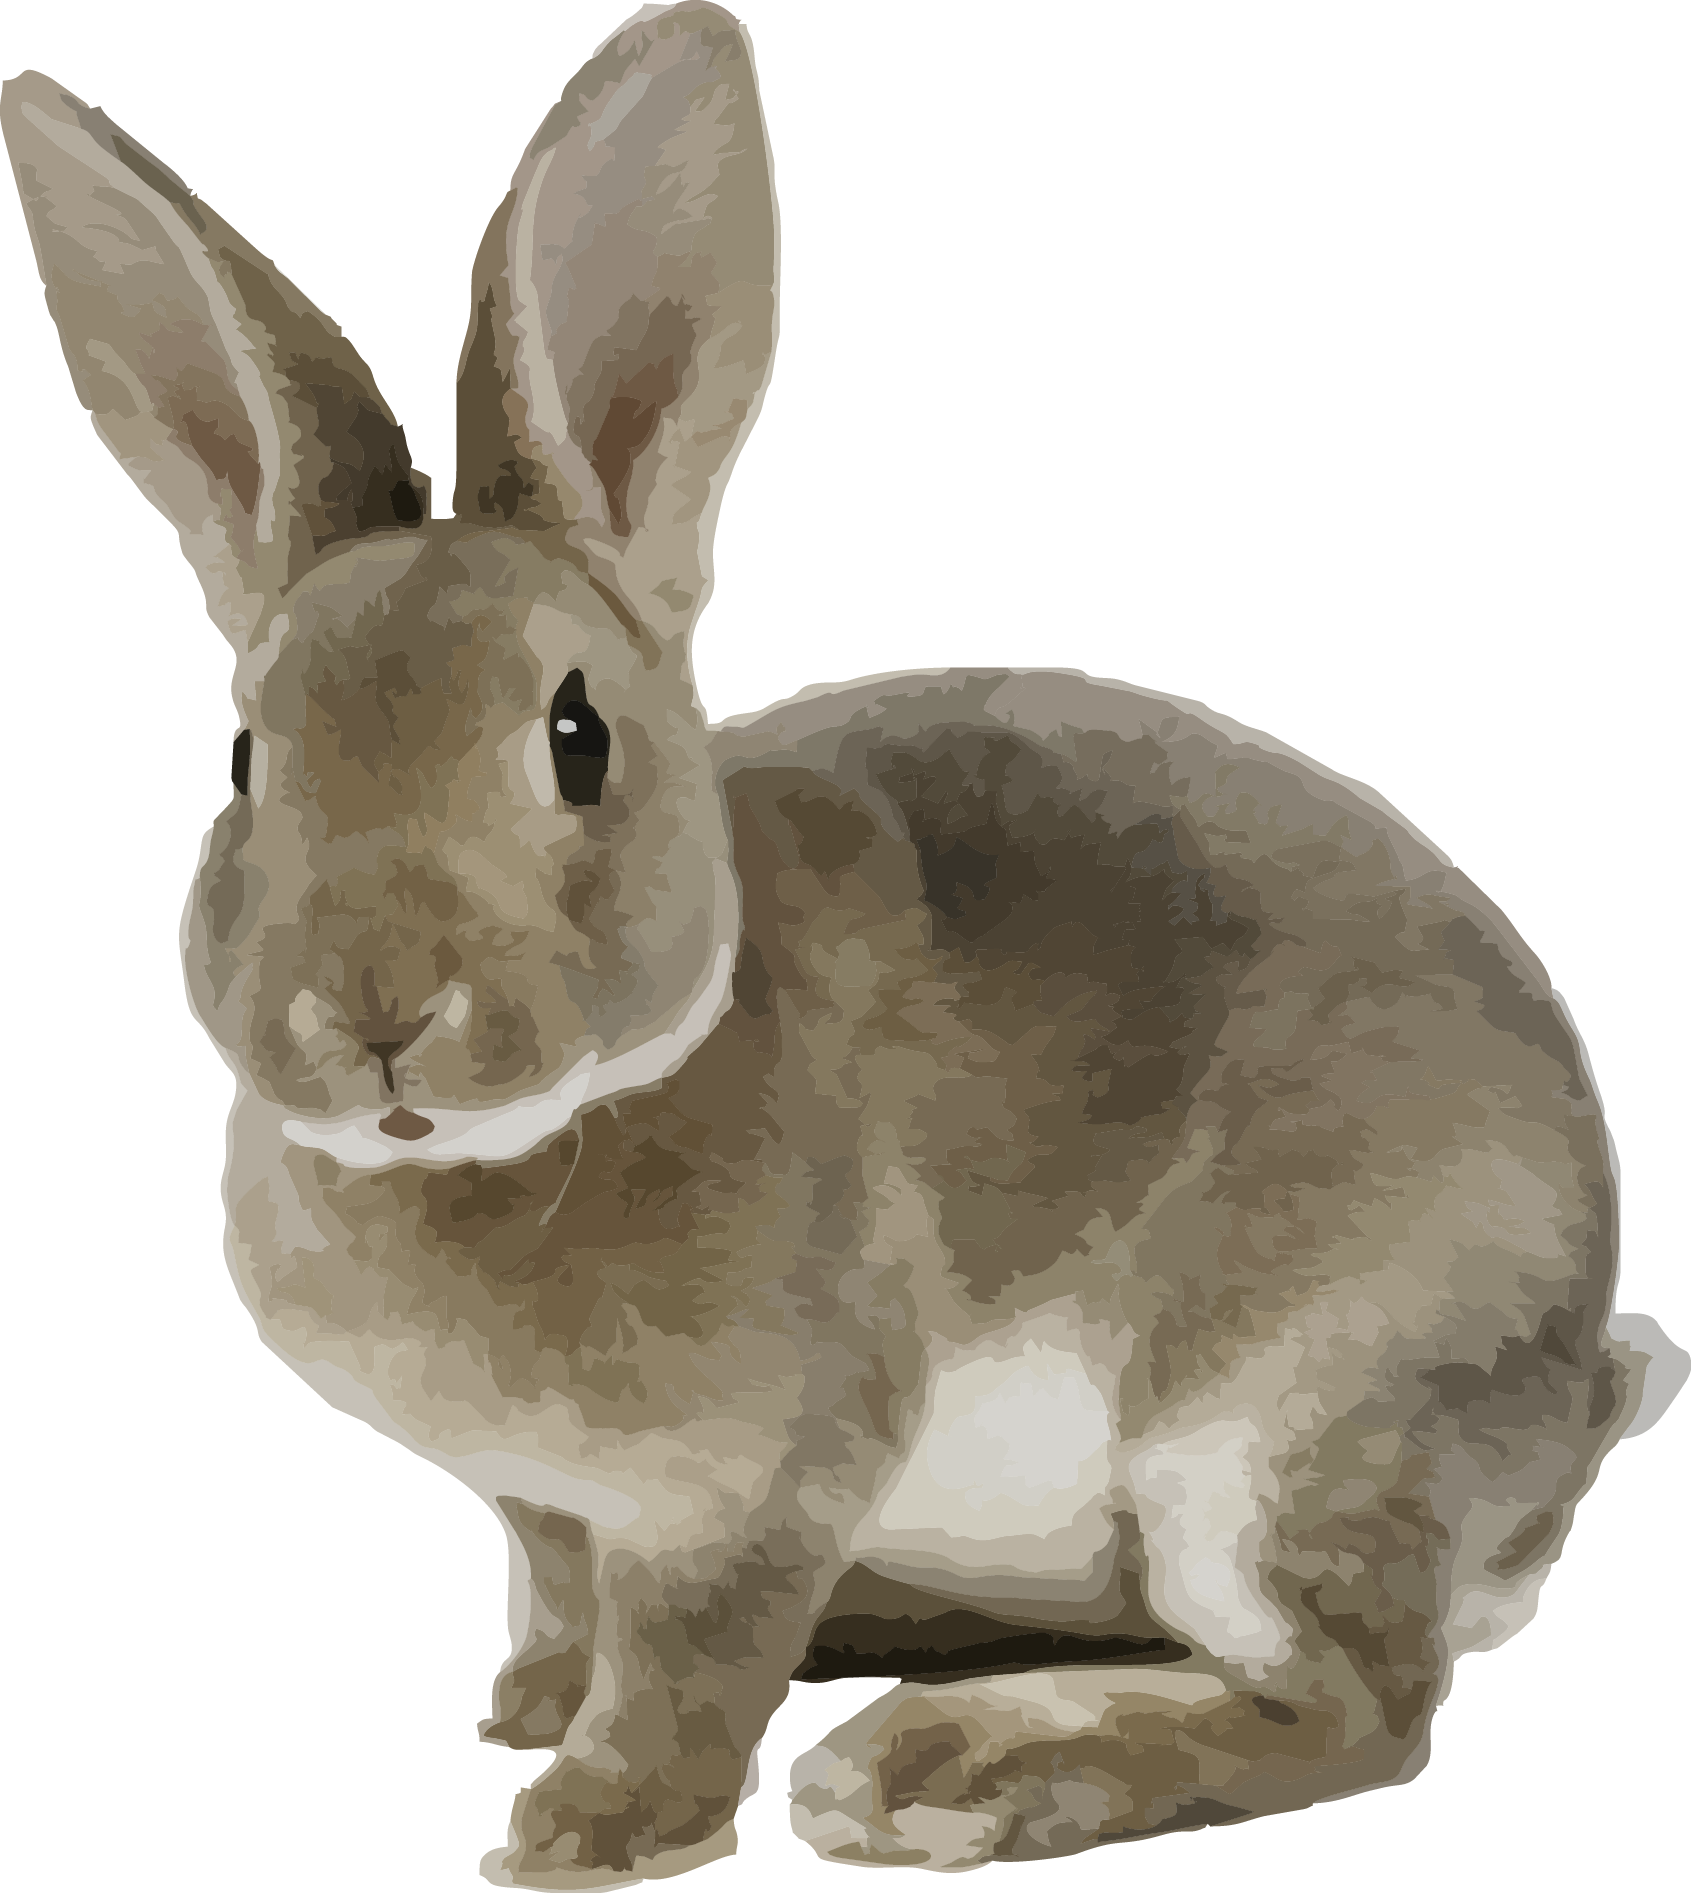 A Rabbit With Large Ears